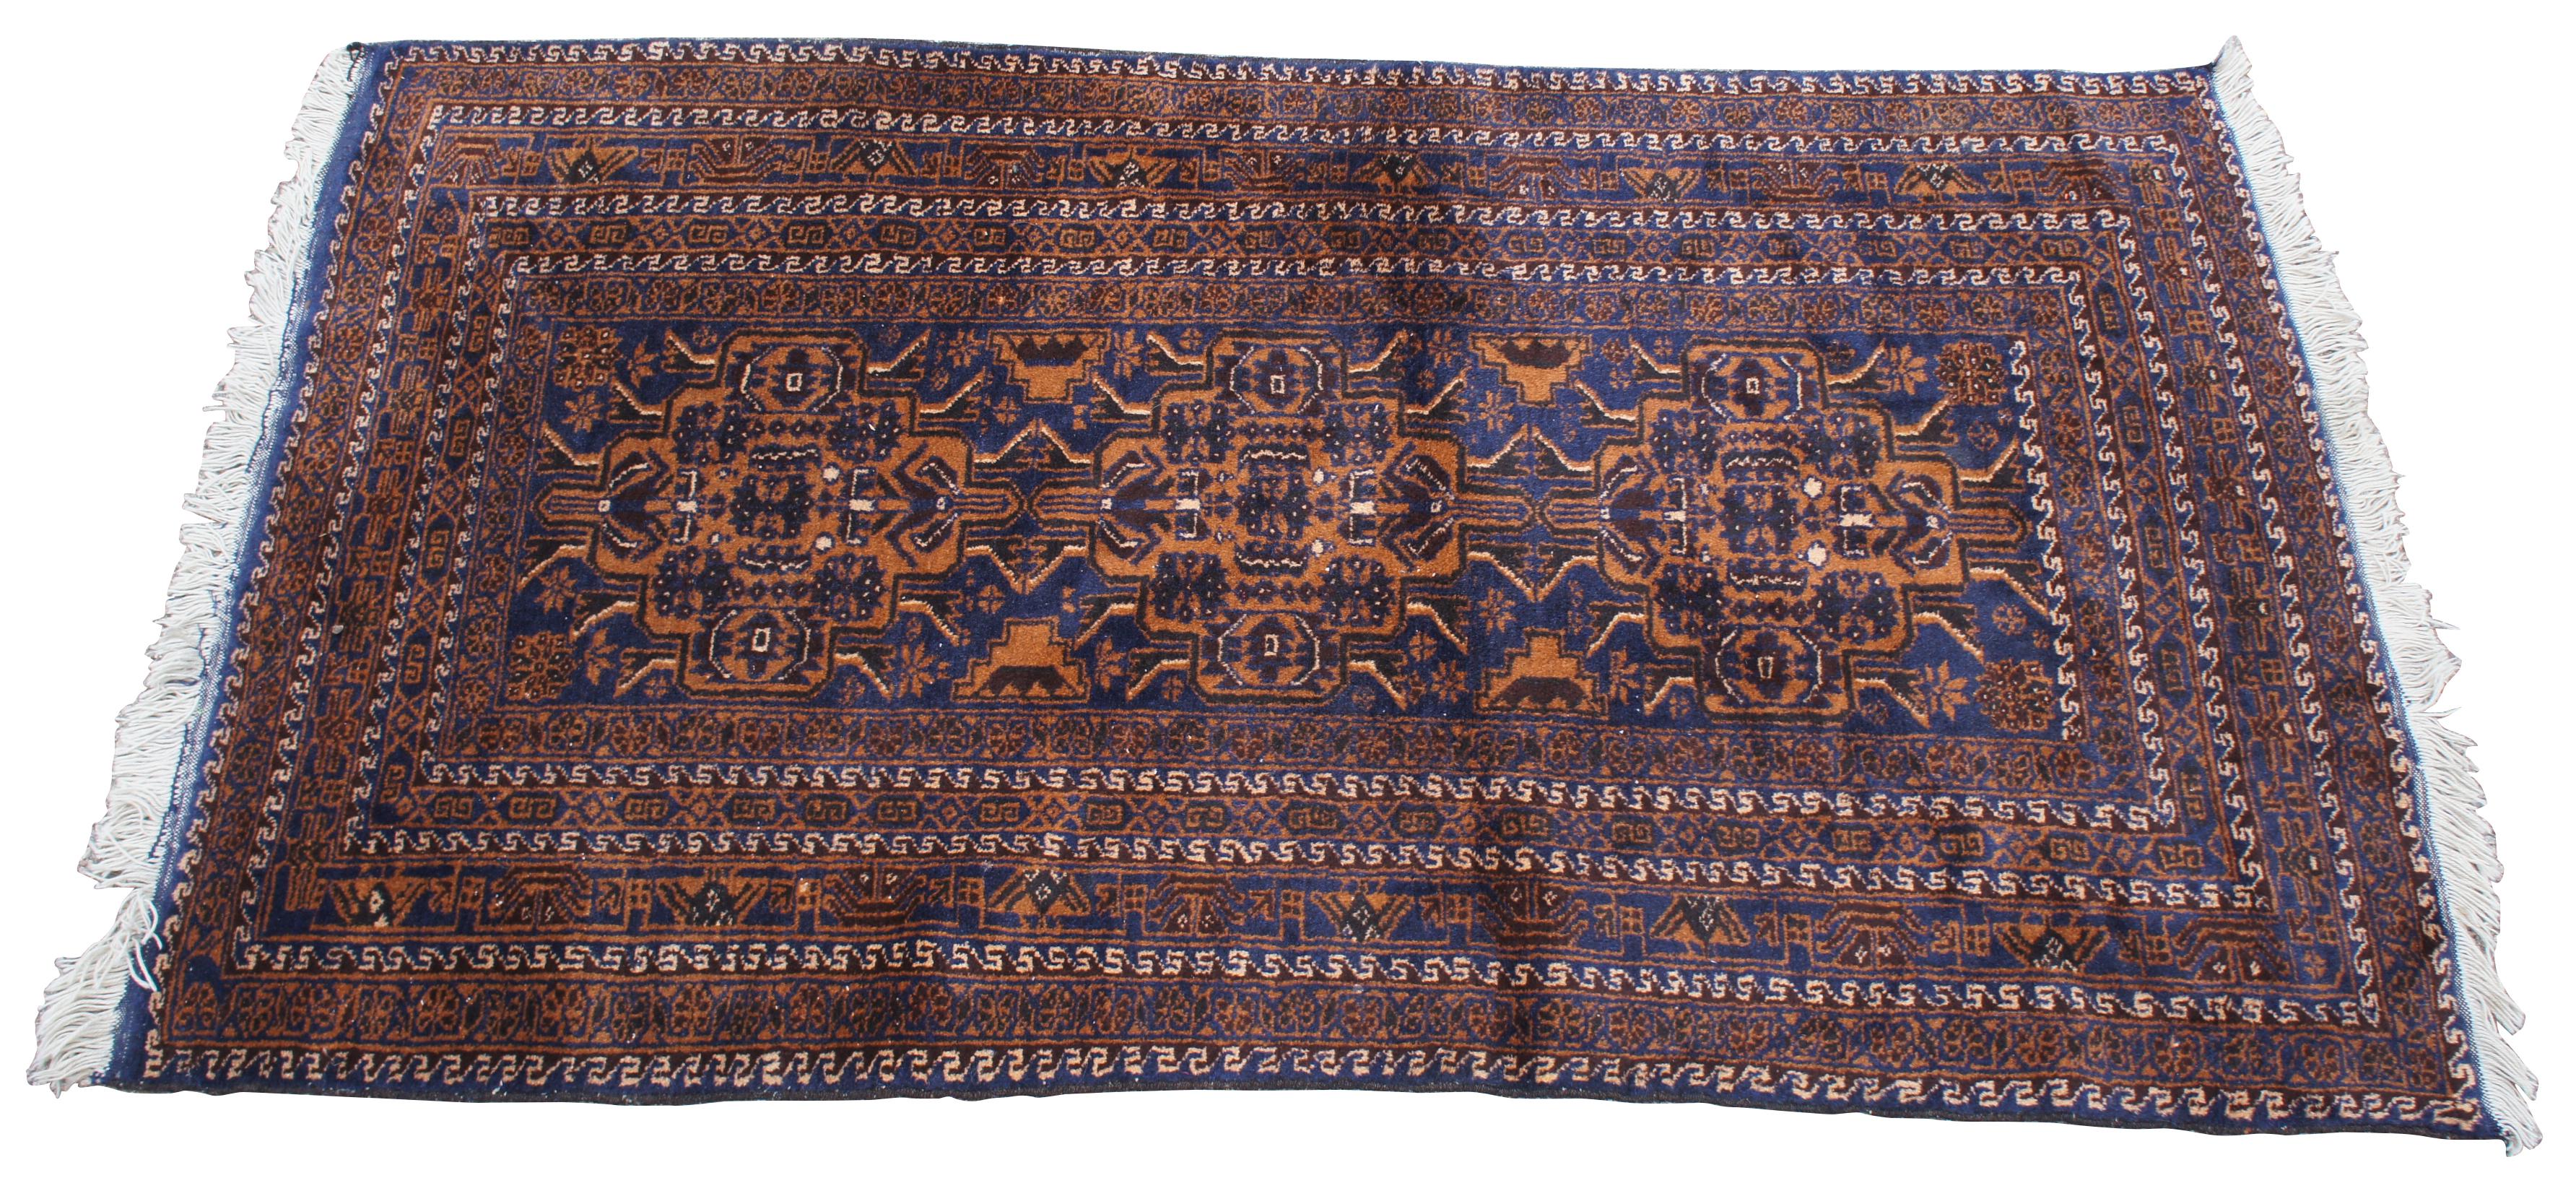 Vintage Persian Baluch wool area rug. Features a geometric repeating pattern with a field of navy blue accented with orange / brown, and tans. Baluchi rug, Baluchi also spelled Baloochi or Balochi, floor covering woven by the Baloch people living in